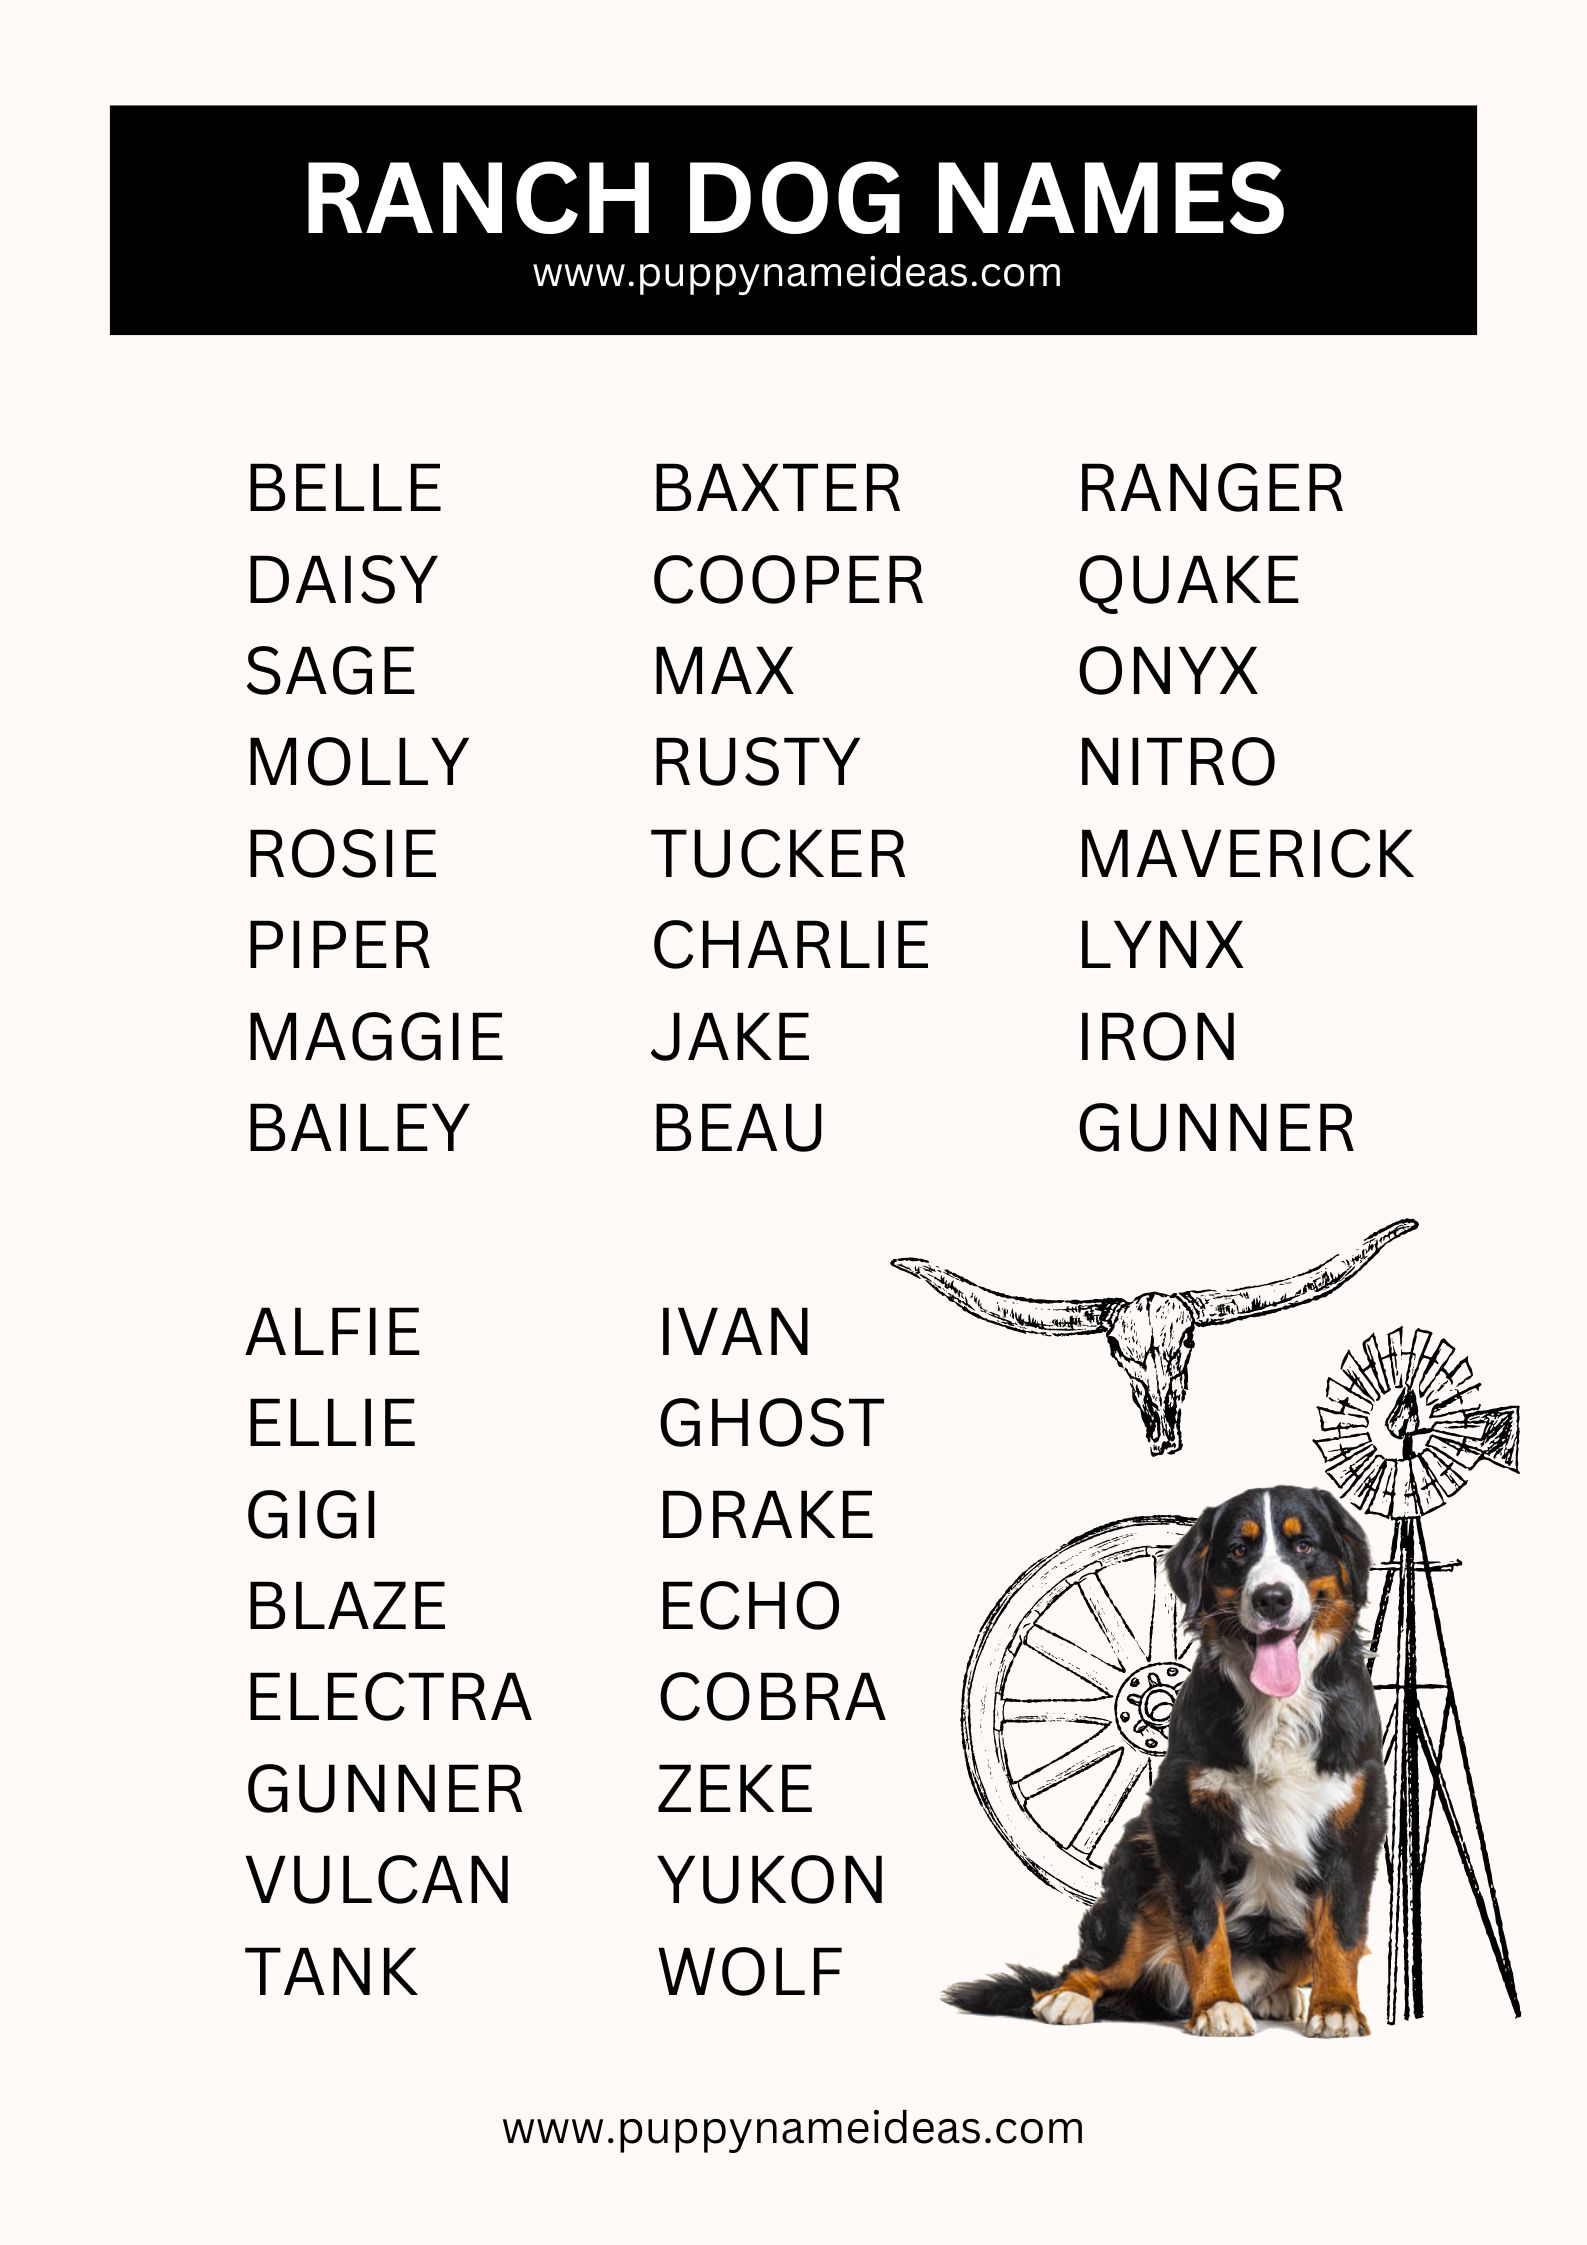 List Of Ranch Dog Names